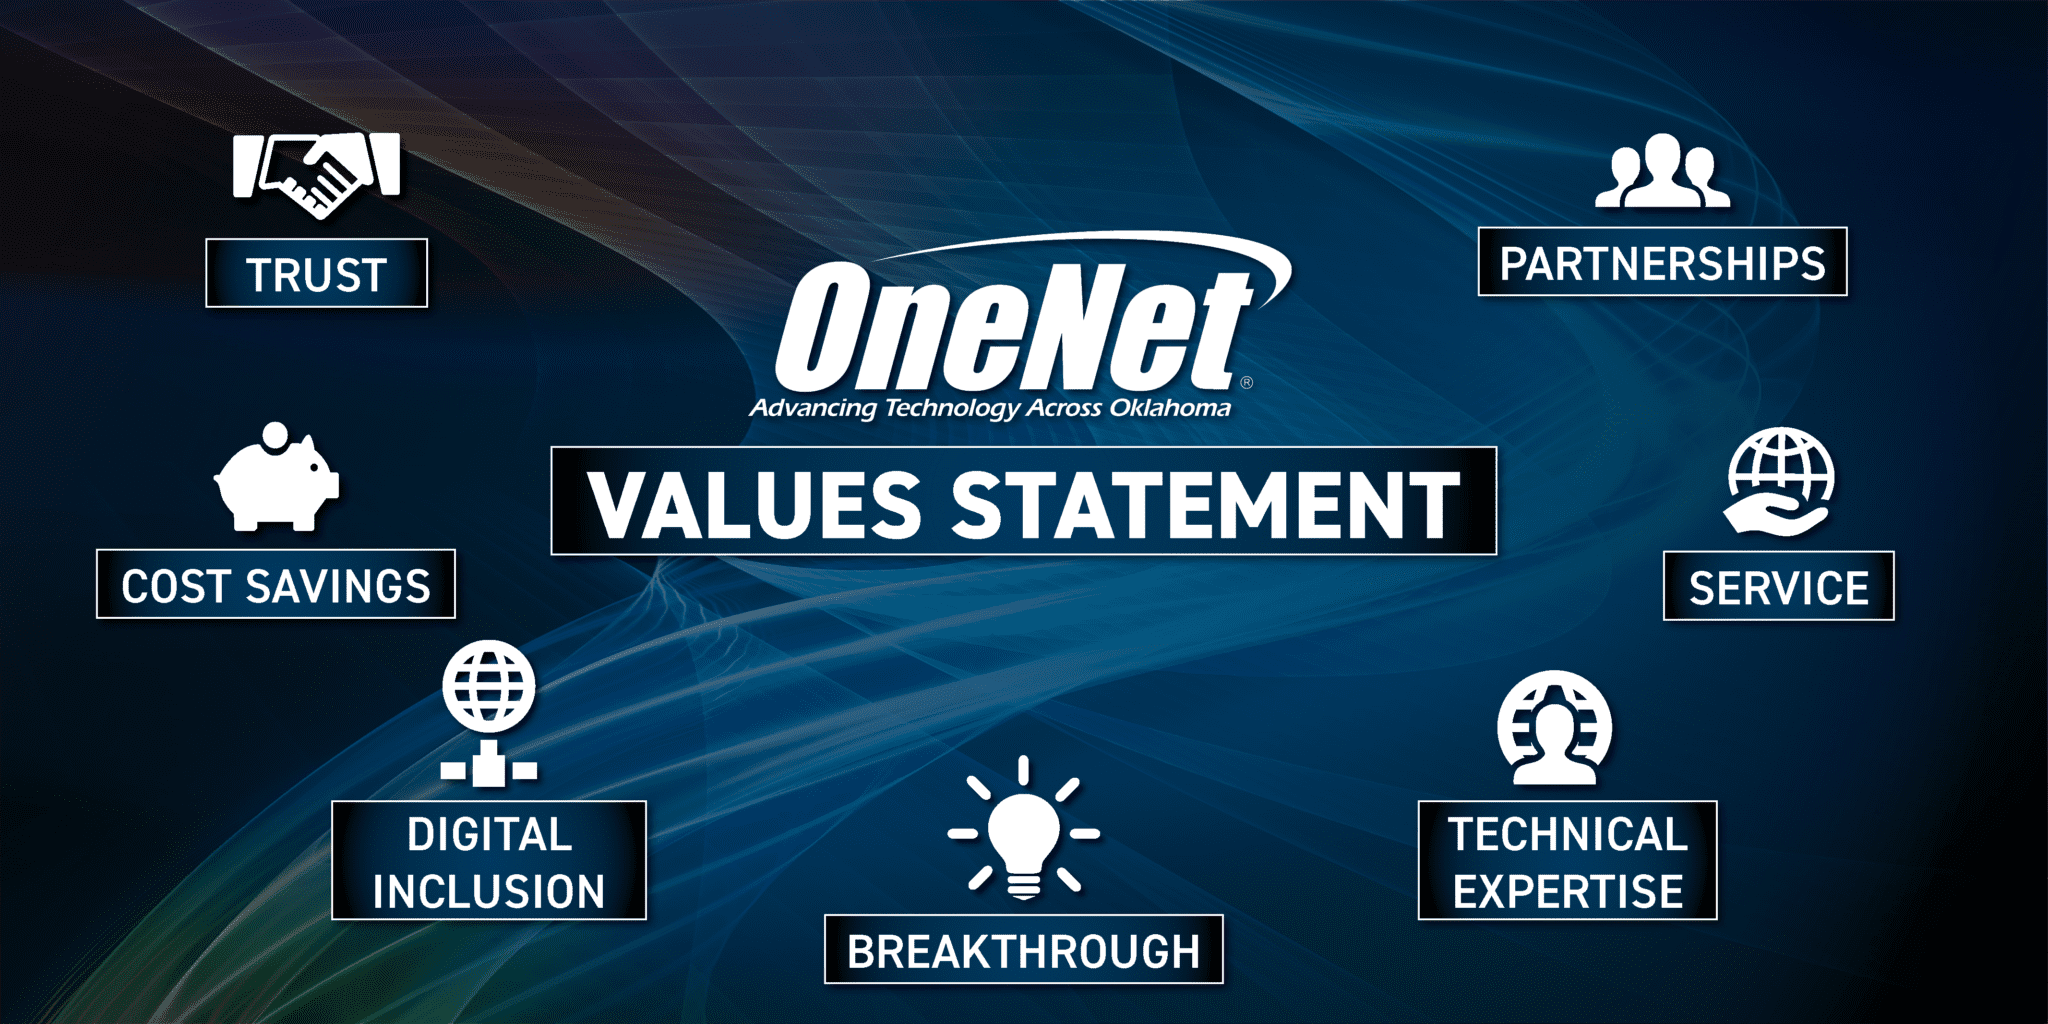 OneNet Values Statement Graphic, Trust, Cost Savings, Digital Inclusion, Breakthrough, Technical Expertise, Service, Partnerships